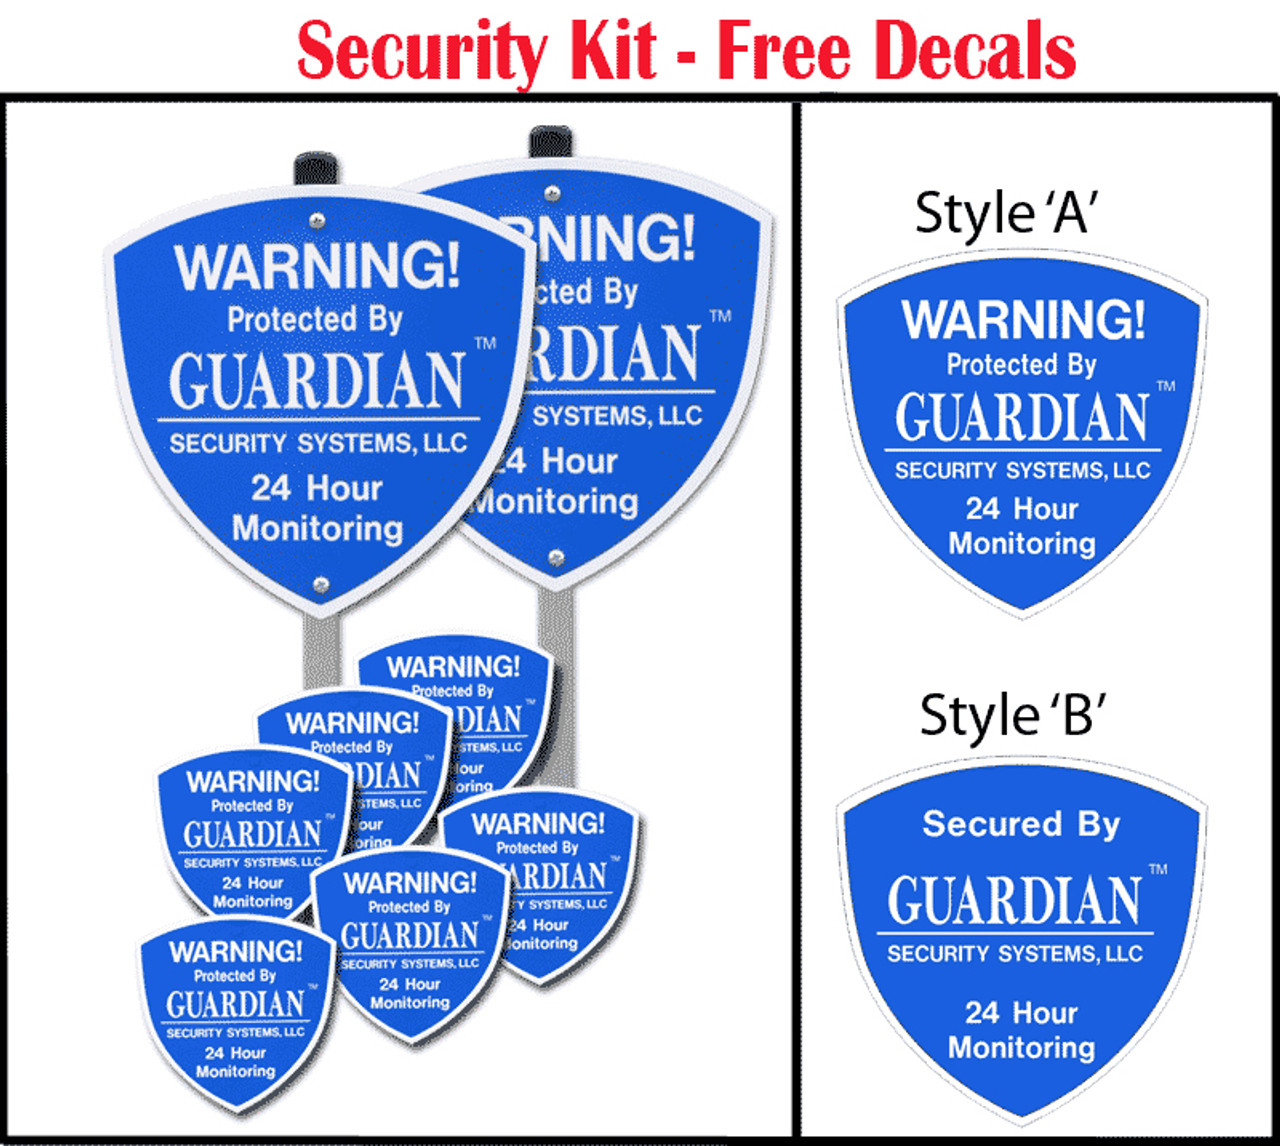 Blink Security Yard Sign 100% Aluminum With 6 Exterior Application Decals 